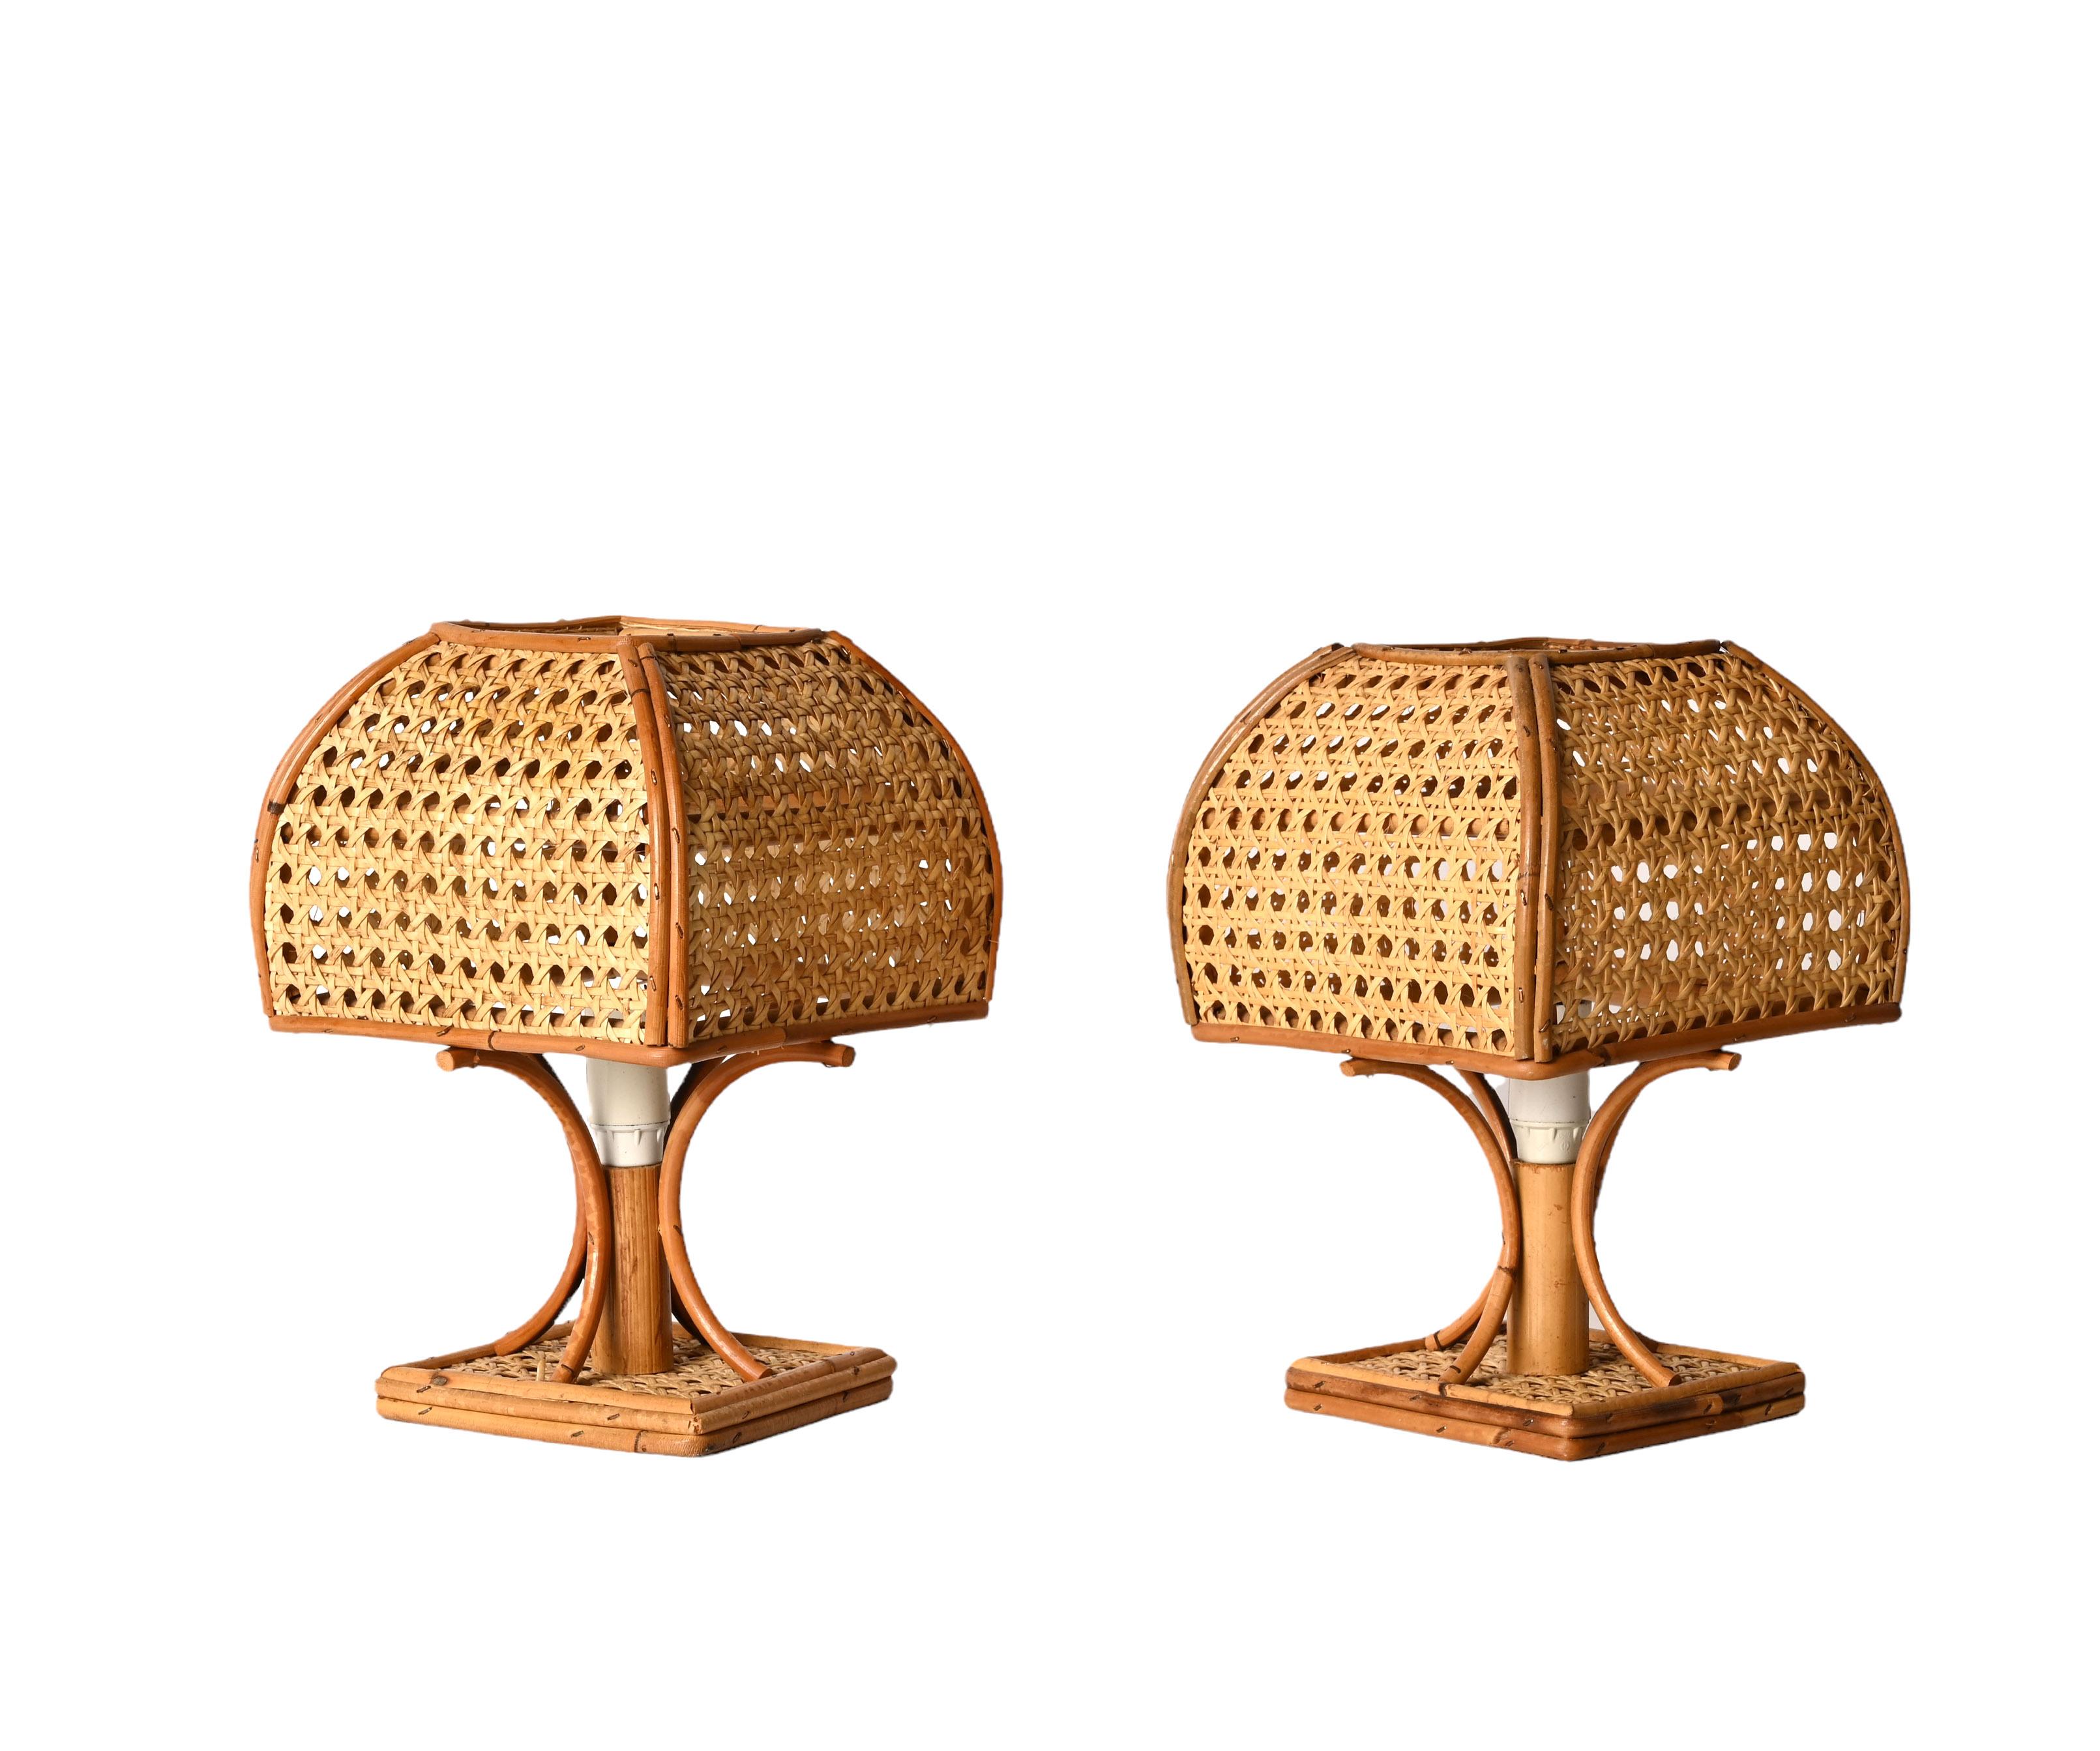 Incredible pair of mid-century wicker and rattan table lamps. These fantastic pieces were designed and made in Italy in the 1960s.

By having a wicker and Vienna straw lampshade, the light diffusion is incredibly warm and sexy. This piece exudes